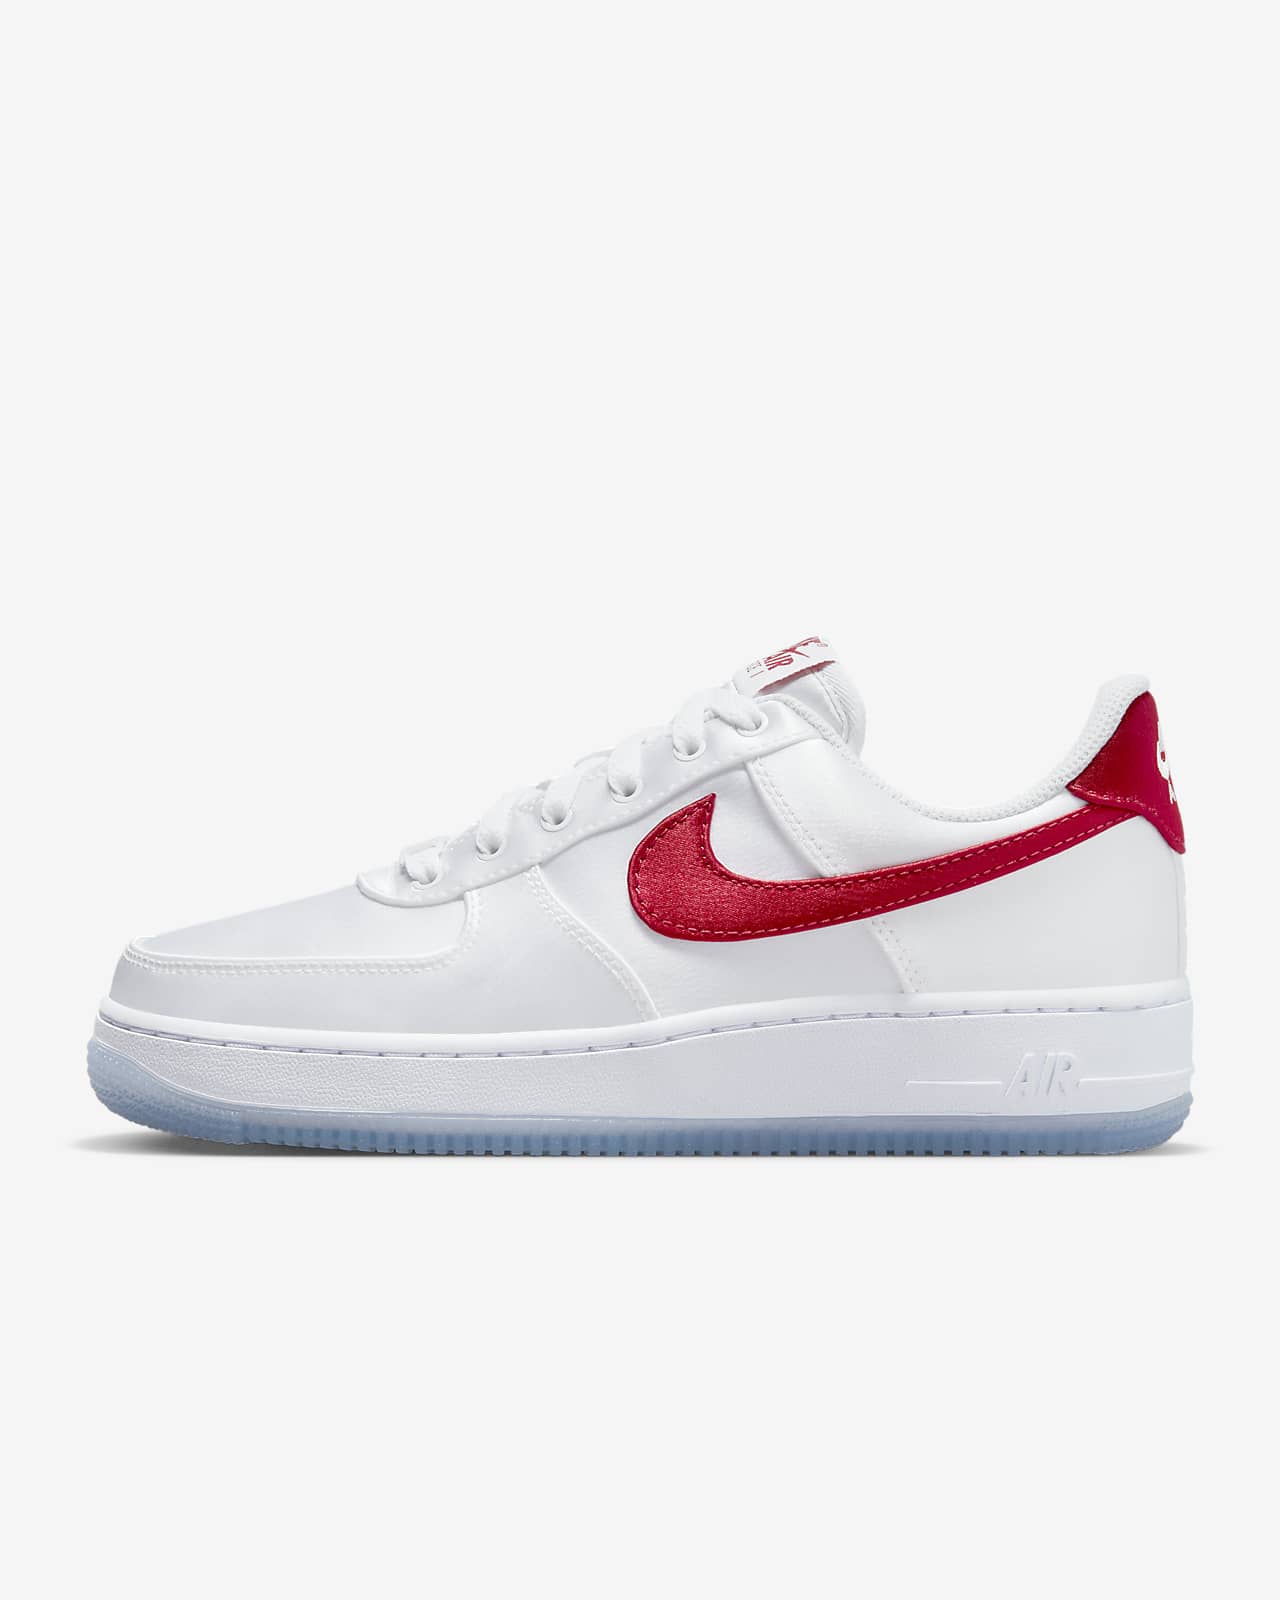 Red Air Force 1 Shoes. Nike CA